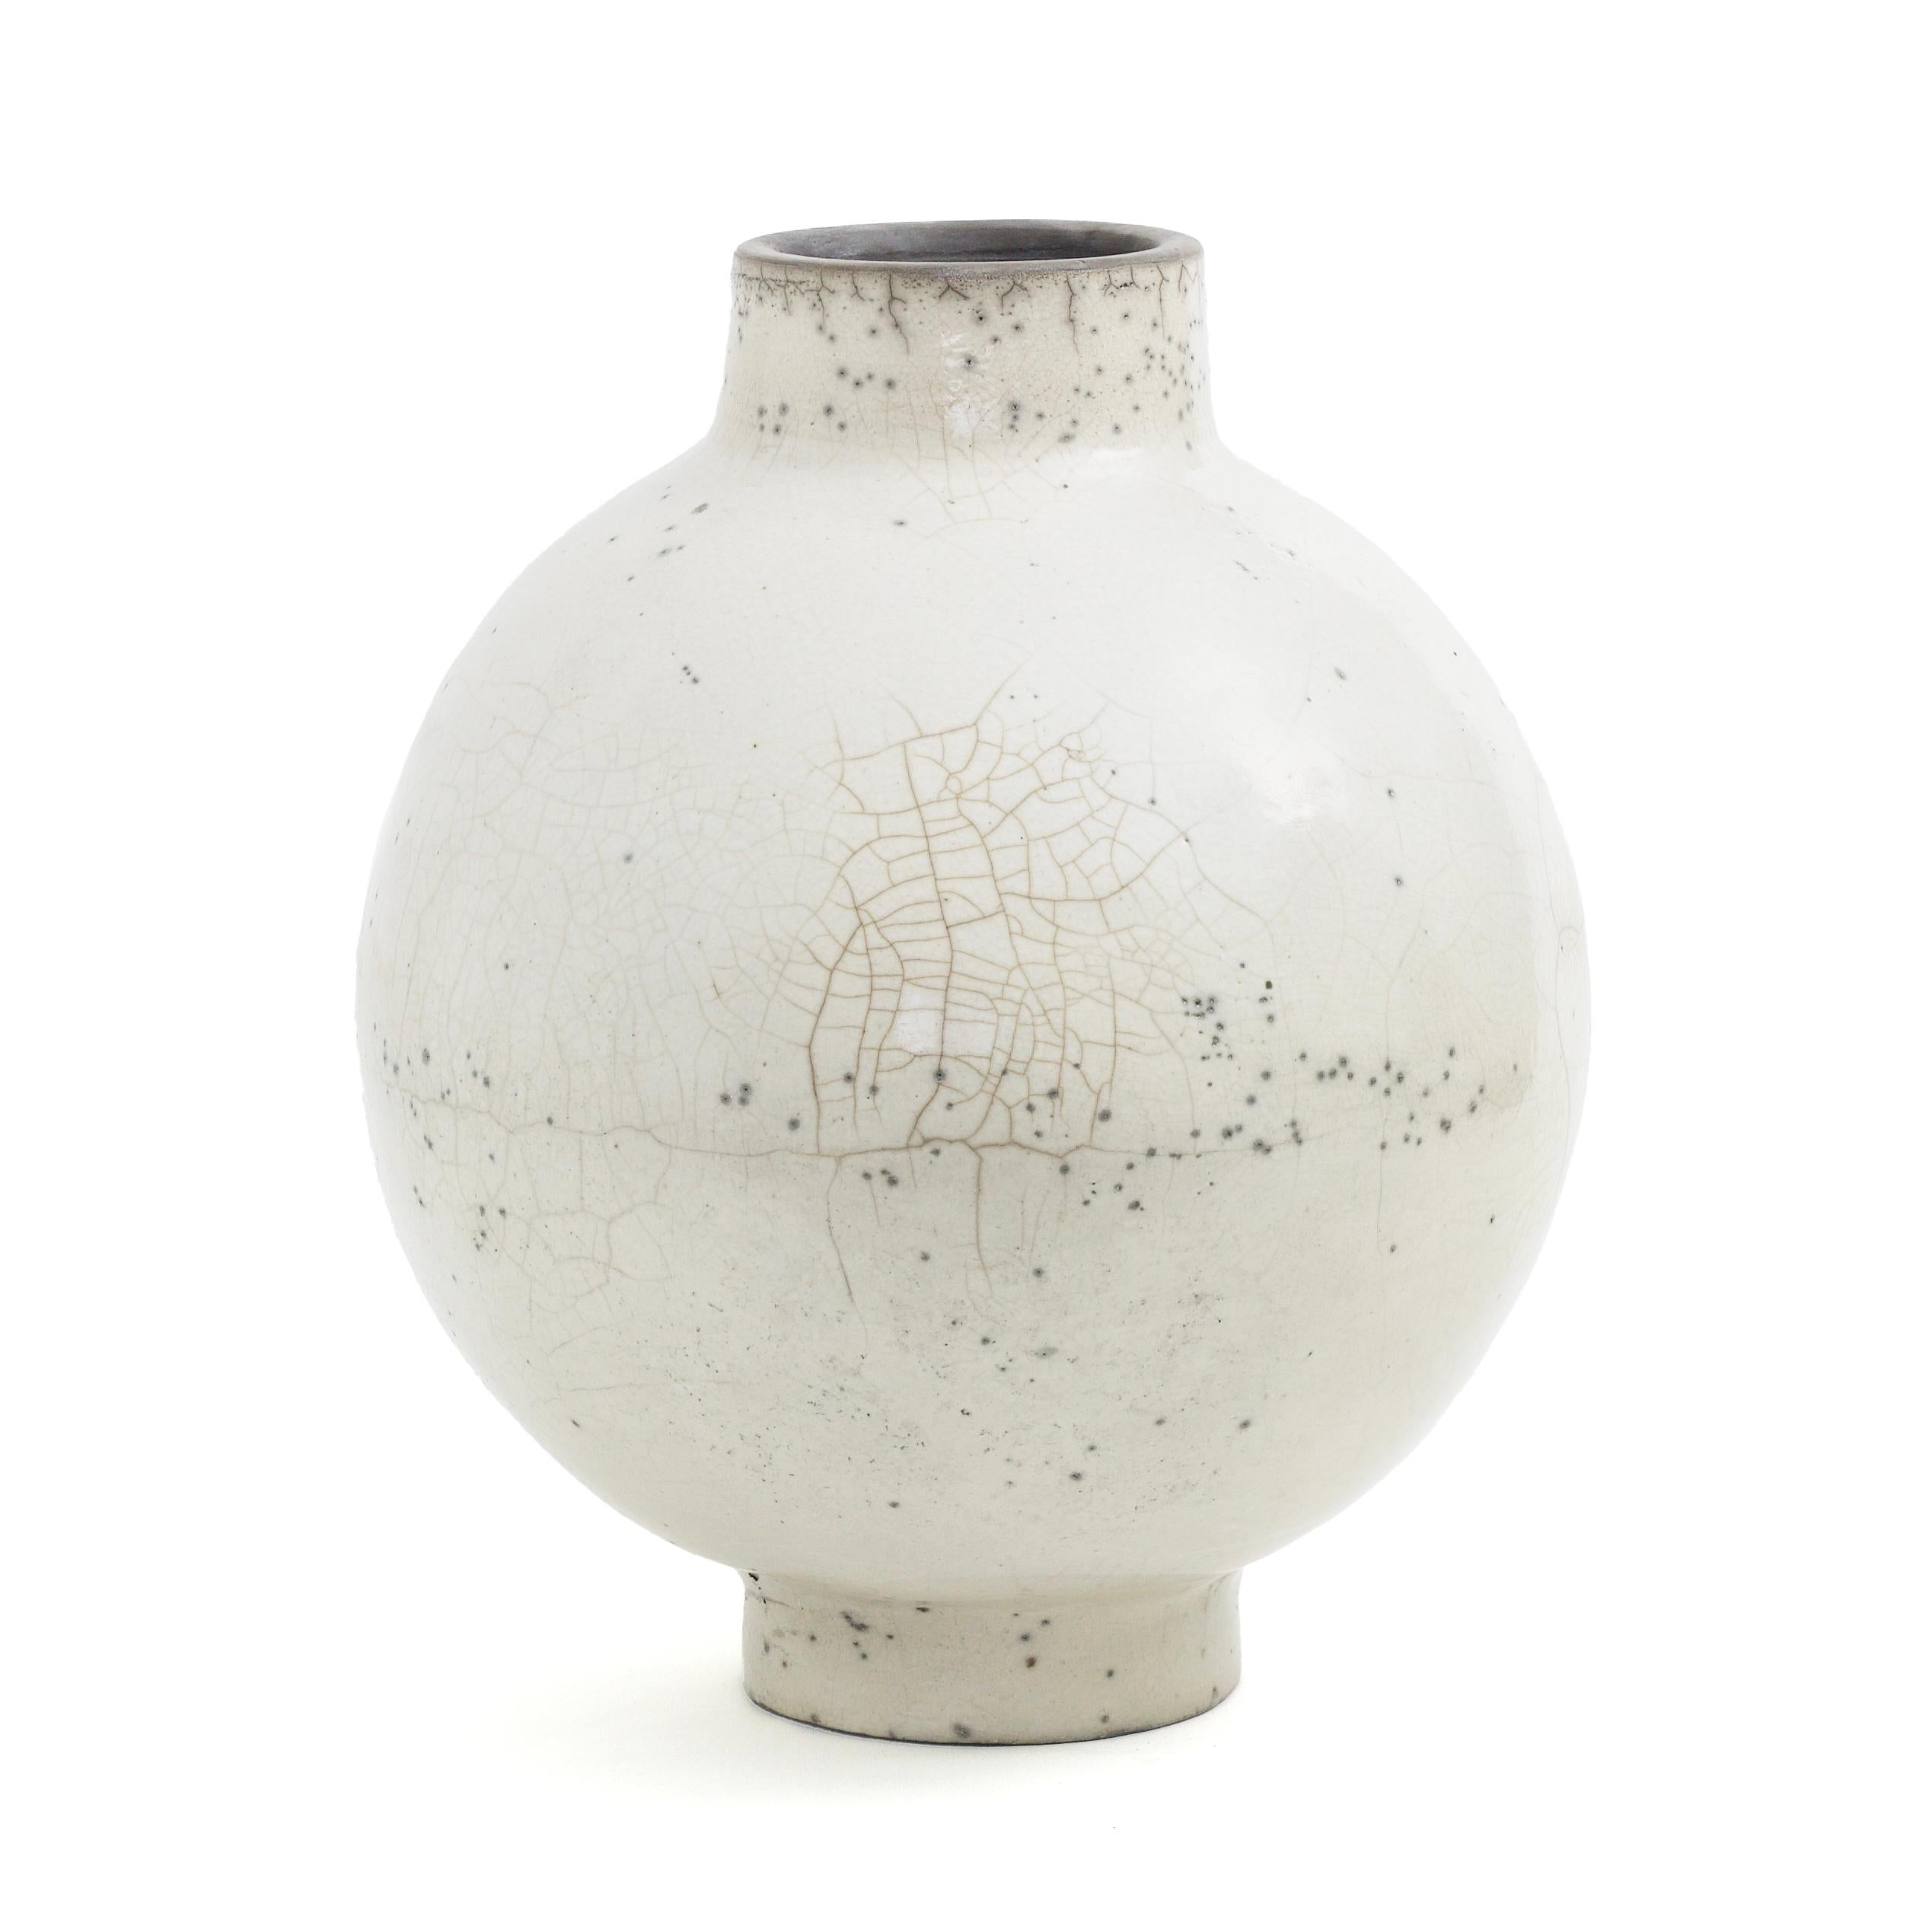 Dome L vase

A bulging body marked by generous curves and enlivened by tiny dark speckles defines this exquisite ceramic vase, whose characteristic, delicate cracks result from a deft application of the Japanese ancient Raku technique. The